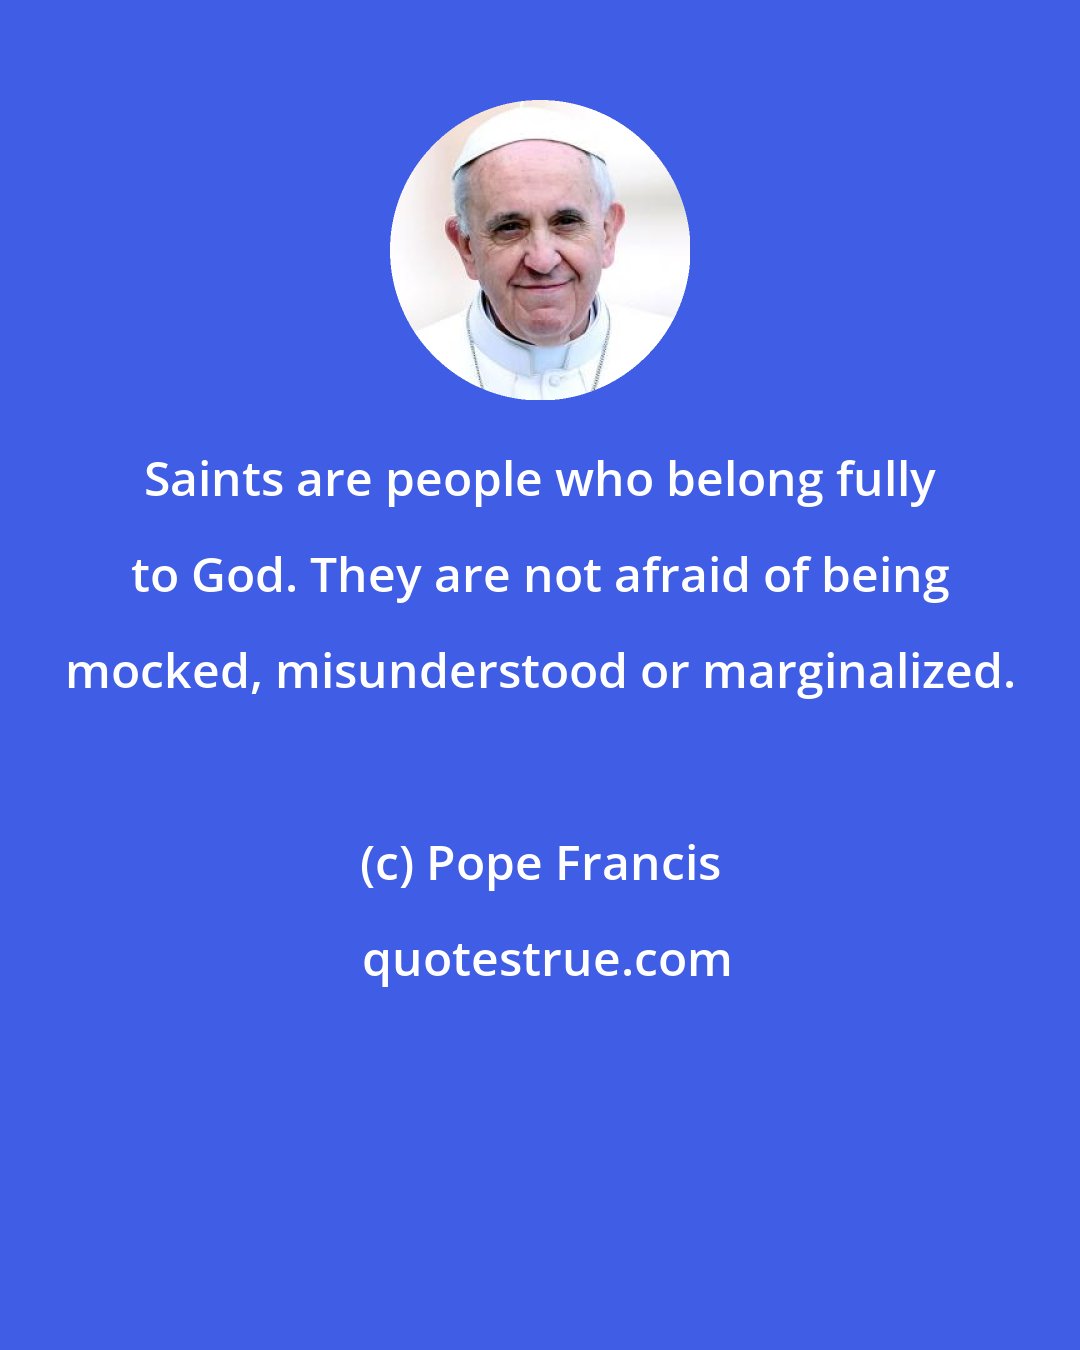 Pope Francis: Saints are people who belong fully to God. They are not afraid of being mocked, misunderstood or marginalized.